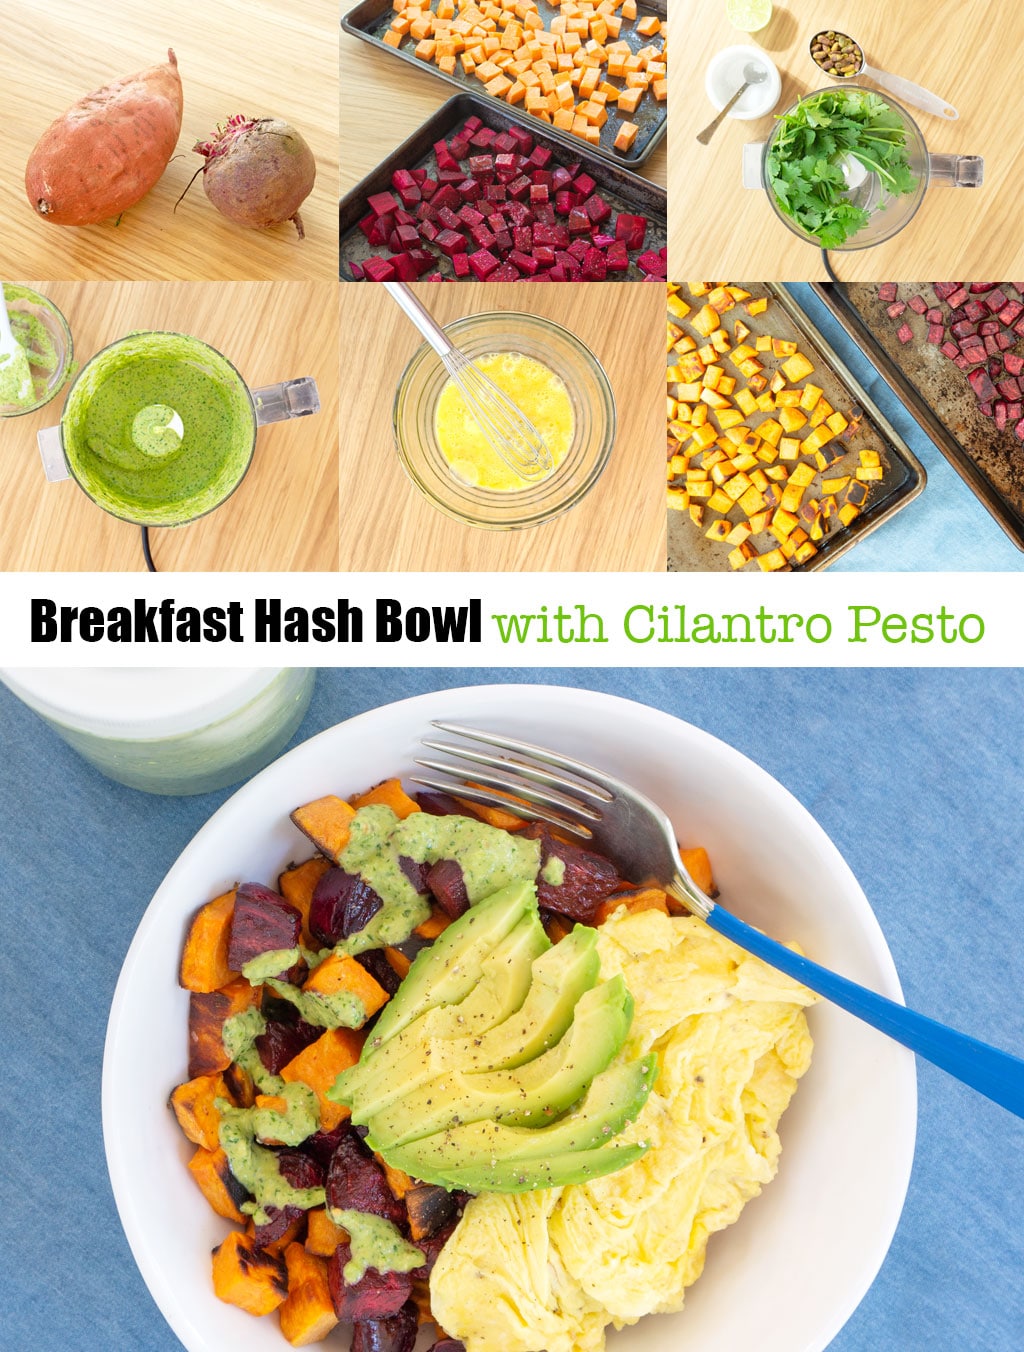 Step by Step photos for how to make a Sweet Potato Hash Bowl with Cilantro Pesto